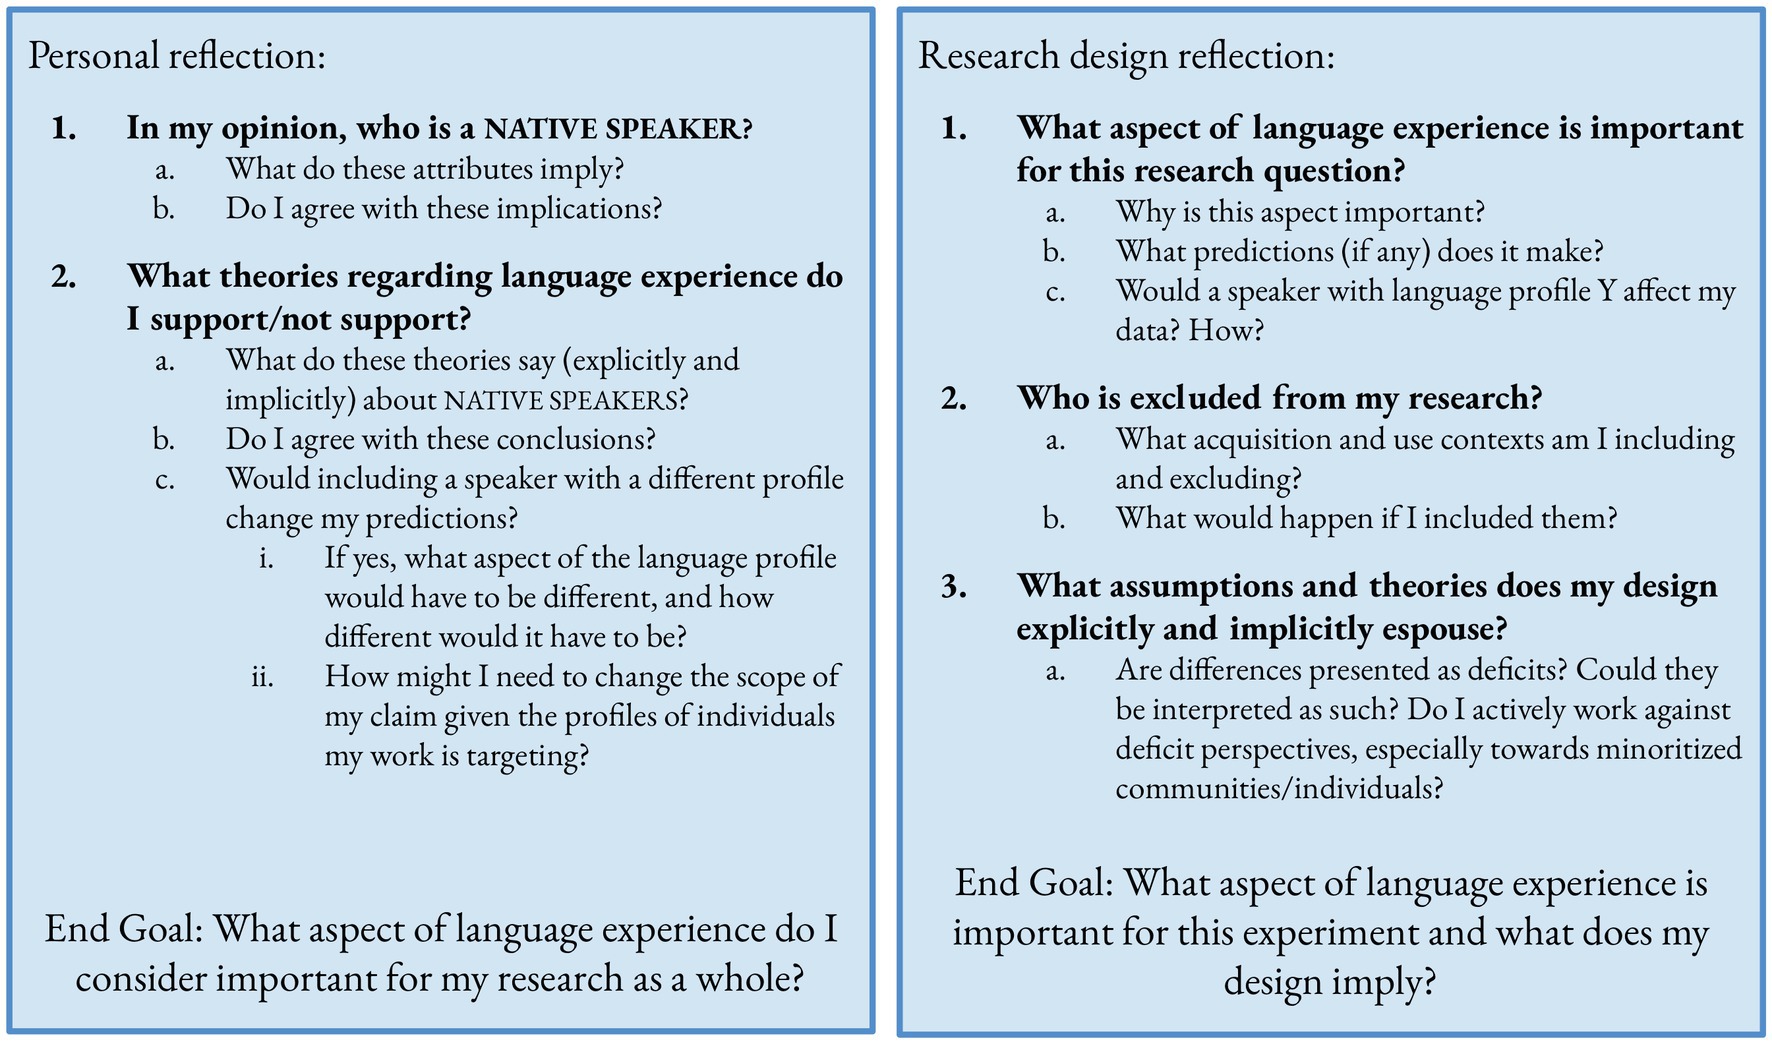 Frontiers | The Problematic Concept of Native Speaker in Psycholinguistics:  Replacing Vague and Harmful Terminology With Inclusive and Accurate  Measures | Psychology